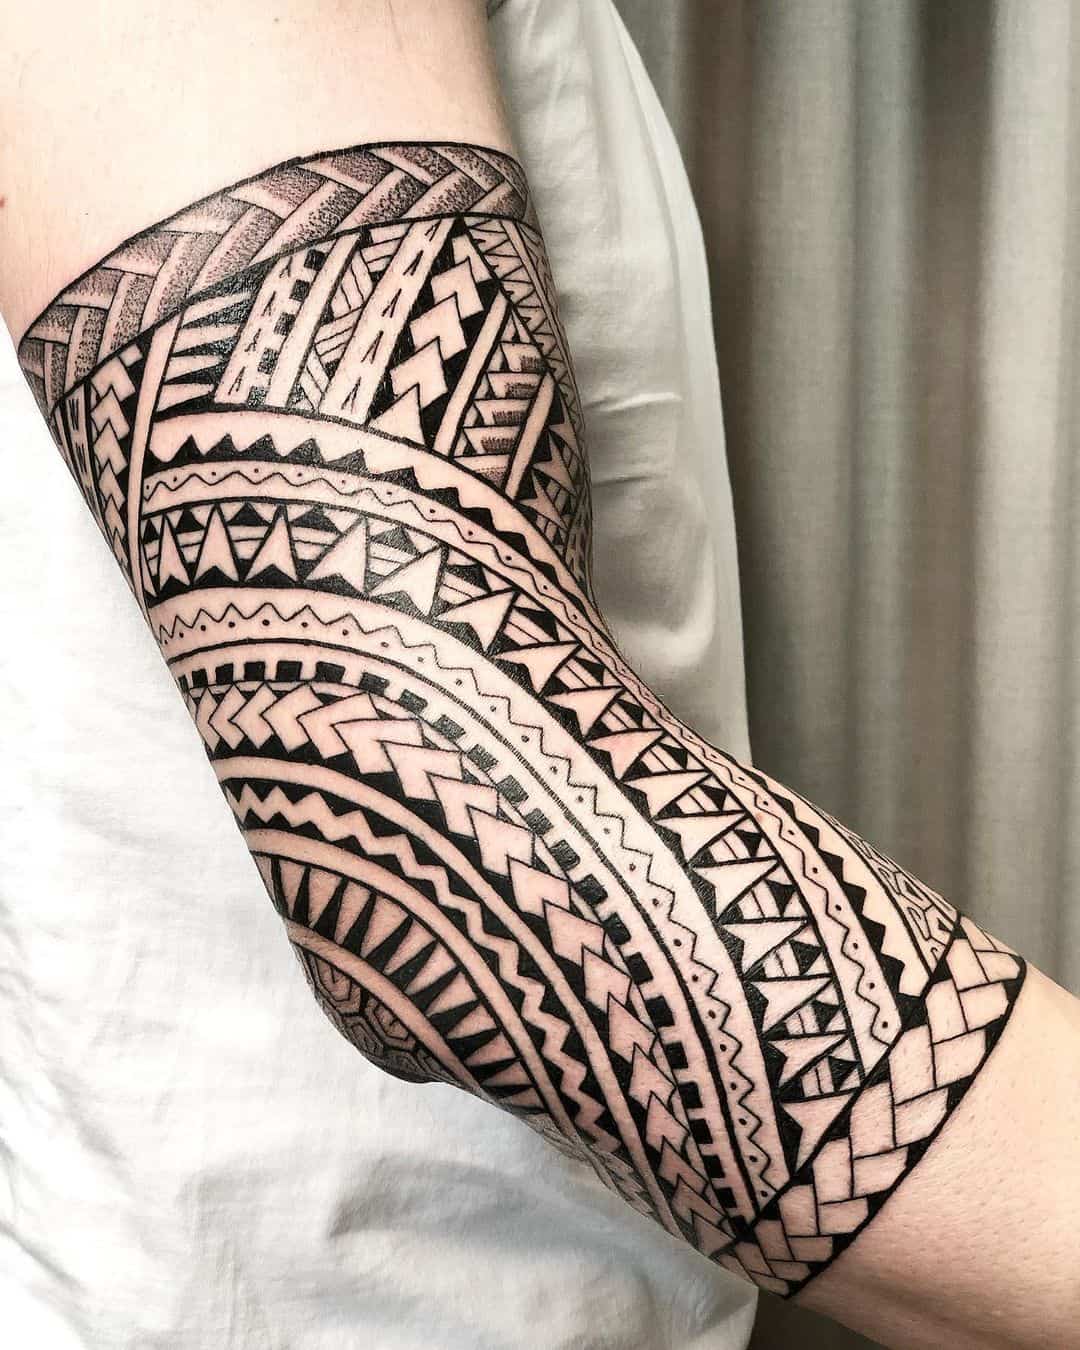 Tribal and Cultural Tattoos – Appropriative and Disrespectful